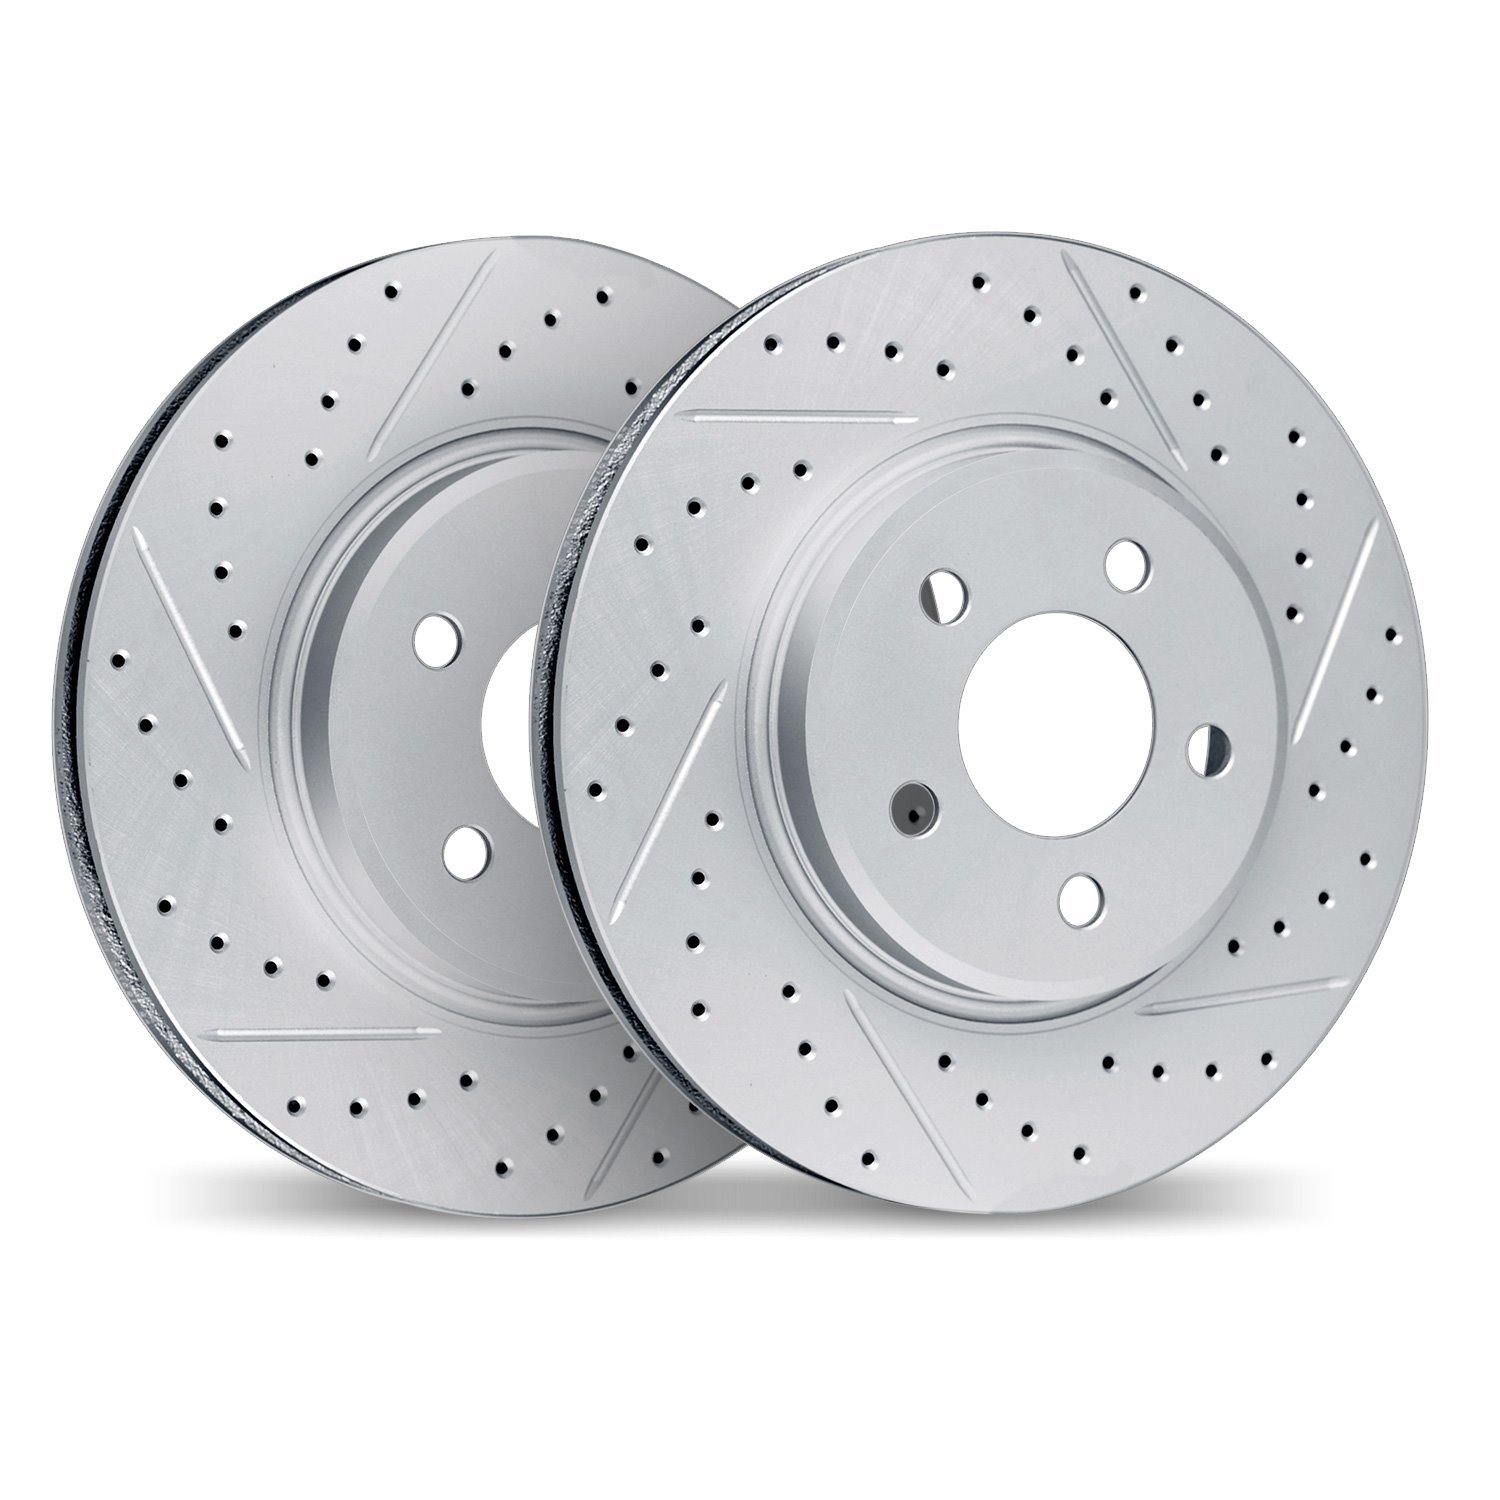 2002-11011 Geoperformance Drilled/Slotted Brake Rotors, 2006-2009 Land Rover, Position: Front